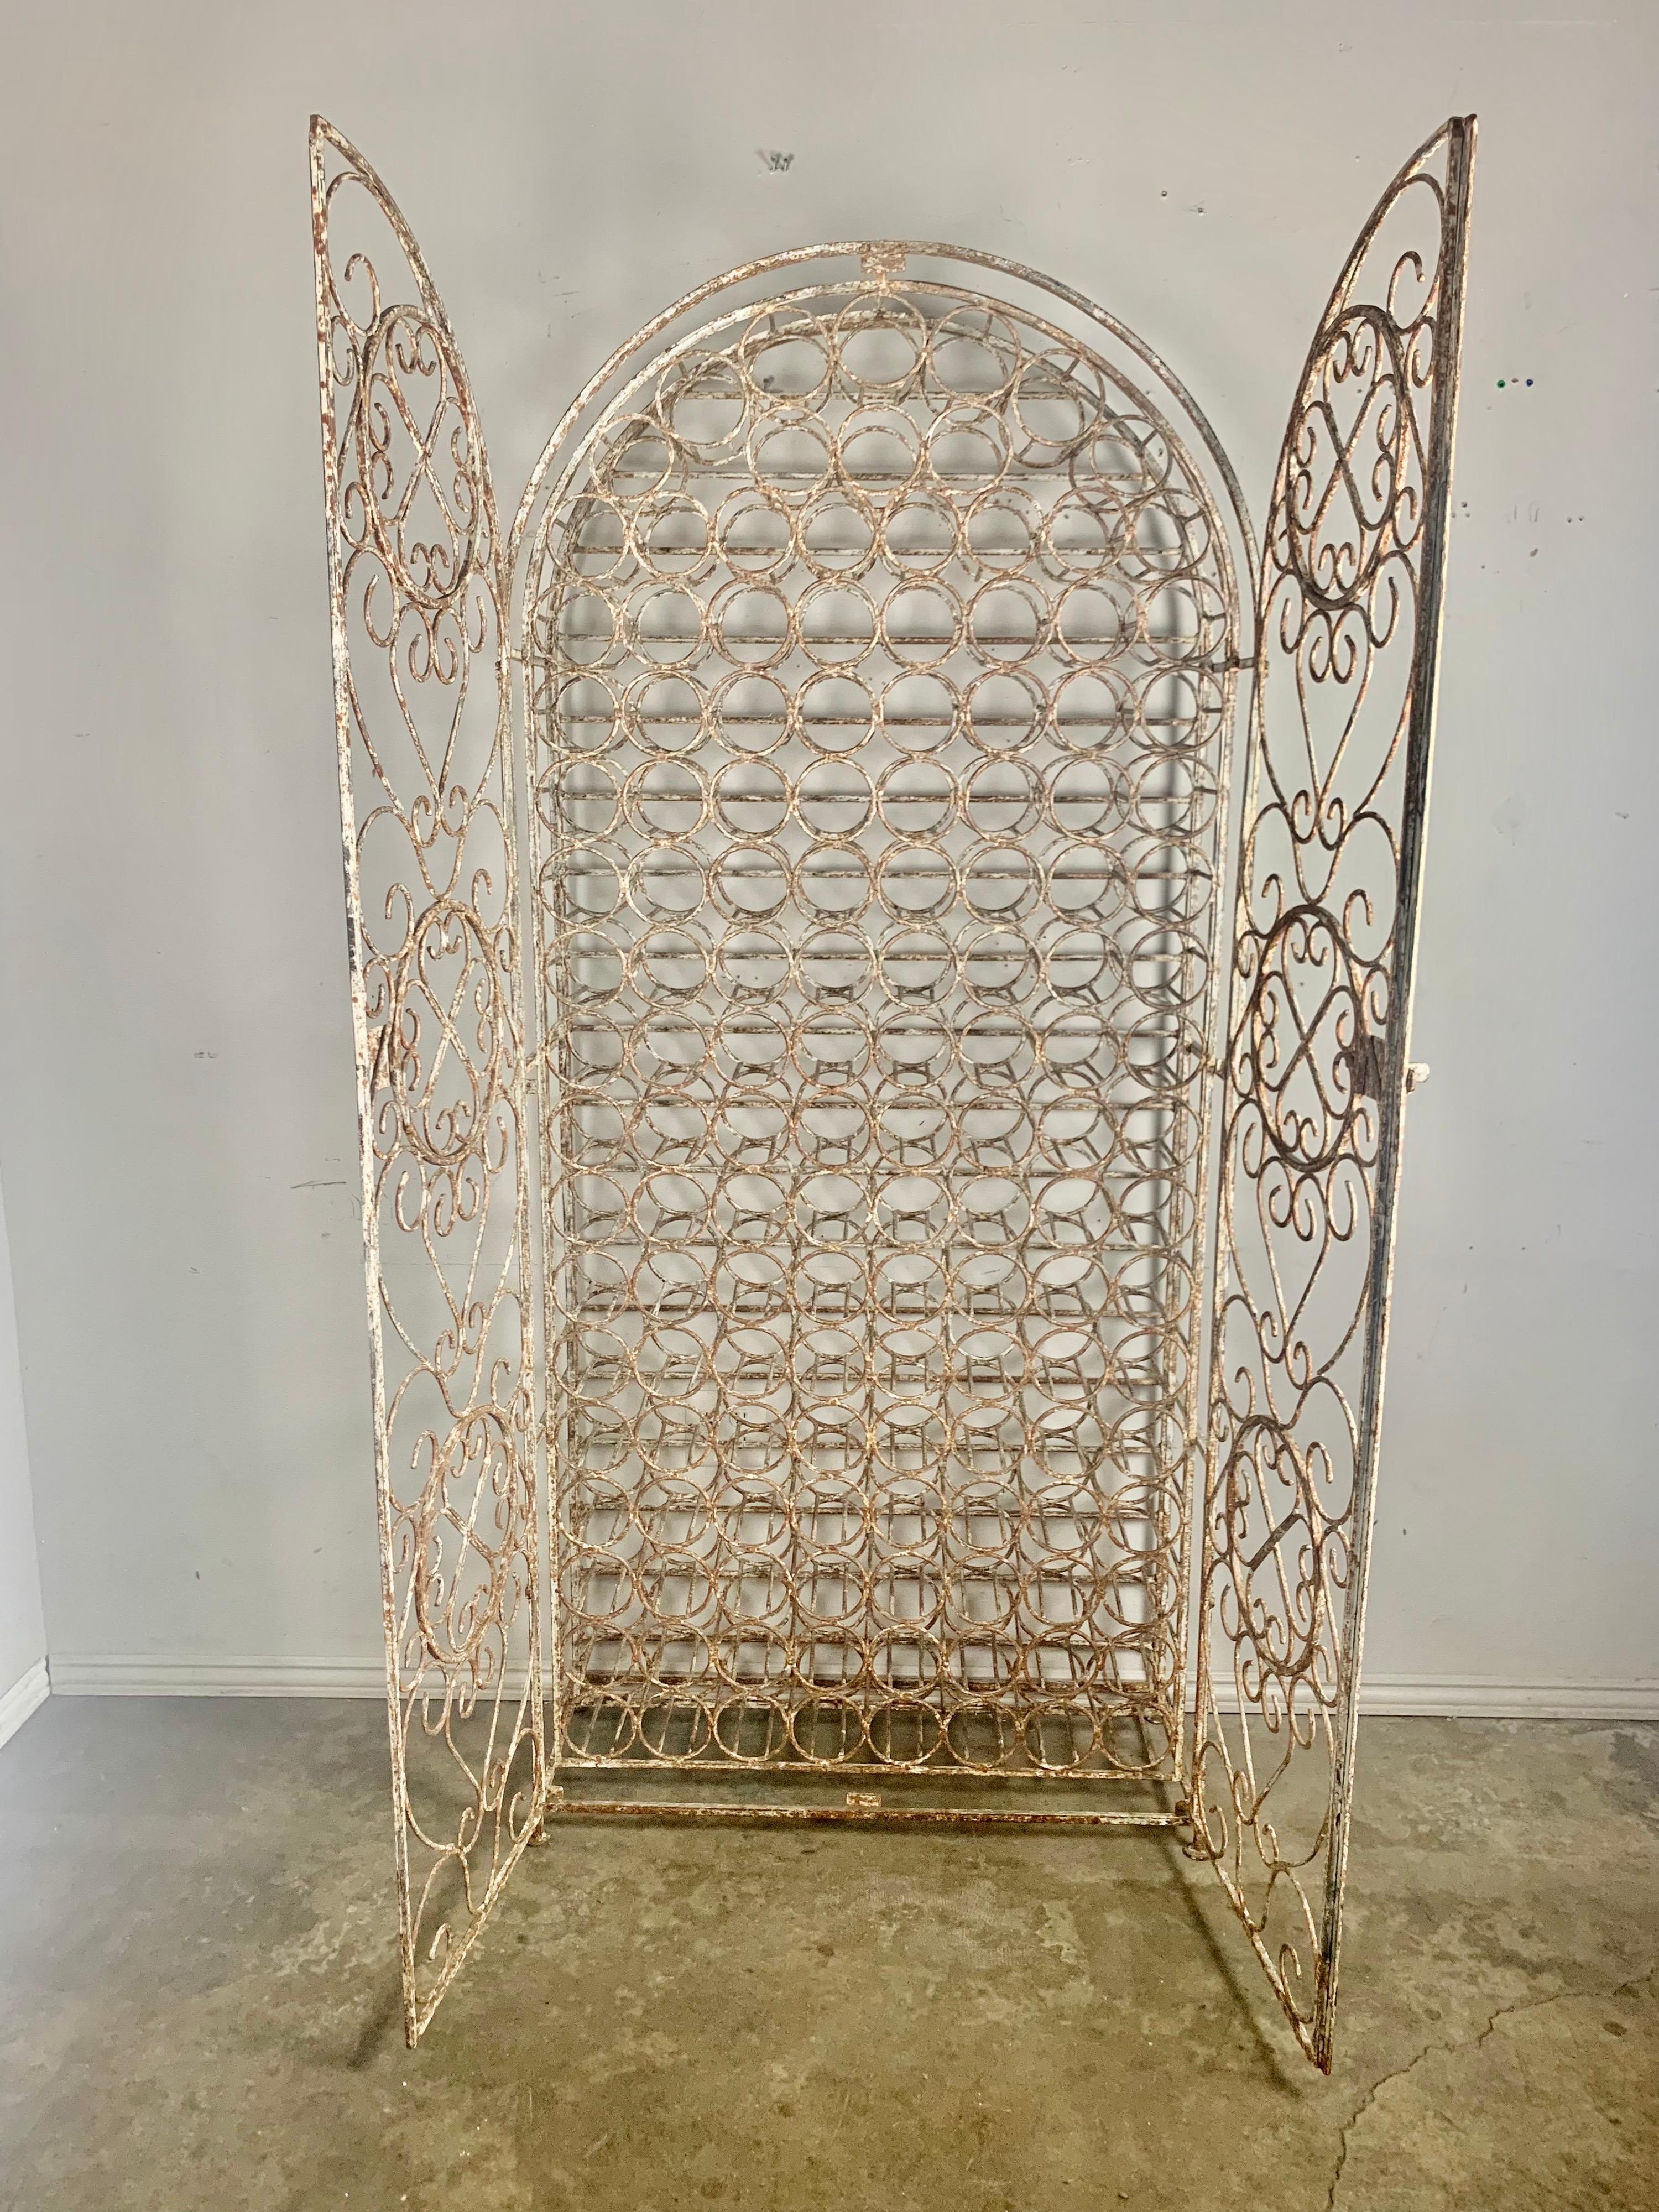 Wrought iron painted wine rack that holds 138 bottles of wine. This painted piece has developed a beautiful patina over the years. A pair of intricately hand forged doors open to reveal enough space to store your favorite wines. Great overall